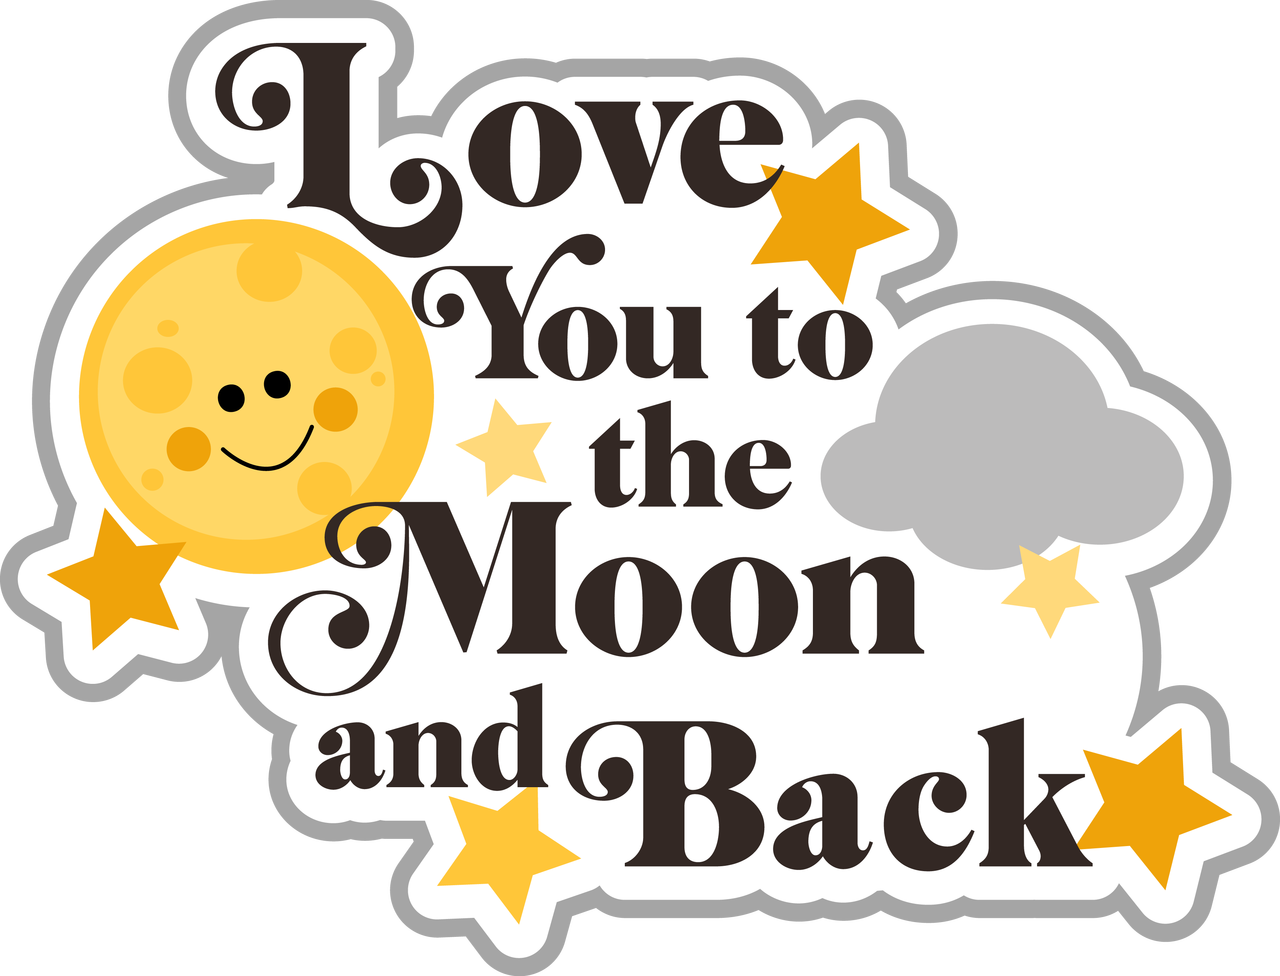 I Think I'm In Love With This Shape From The Silhouette - Love You To The Moon And Back Clipart (1280x976)